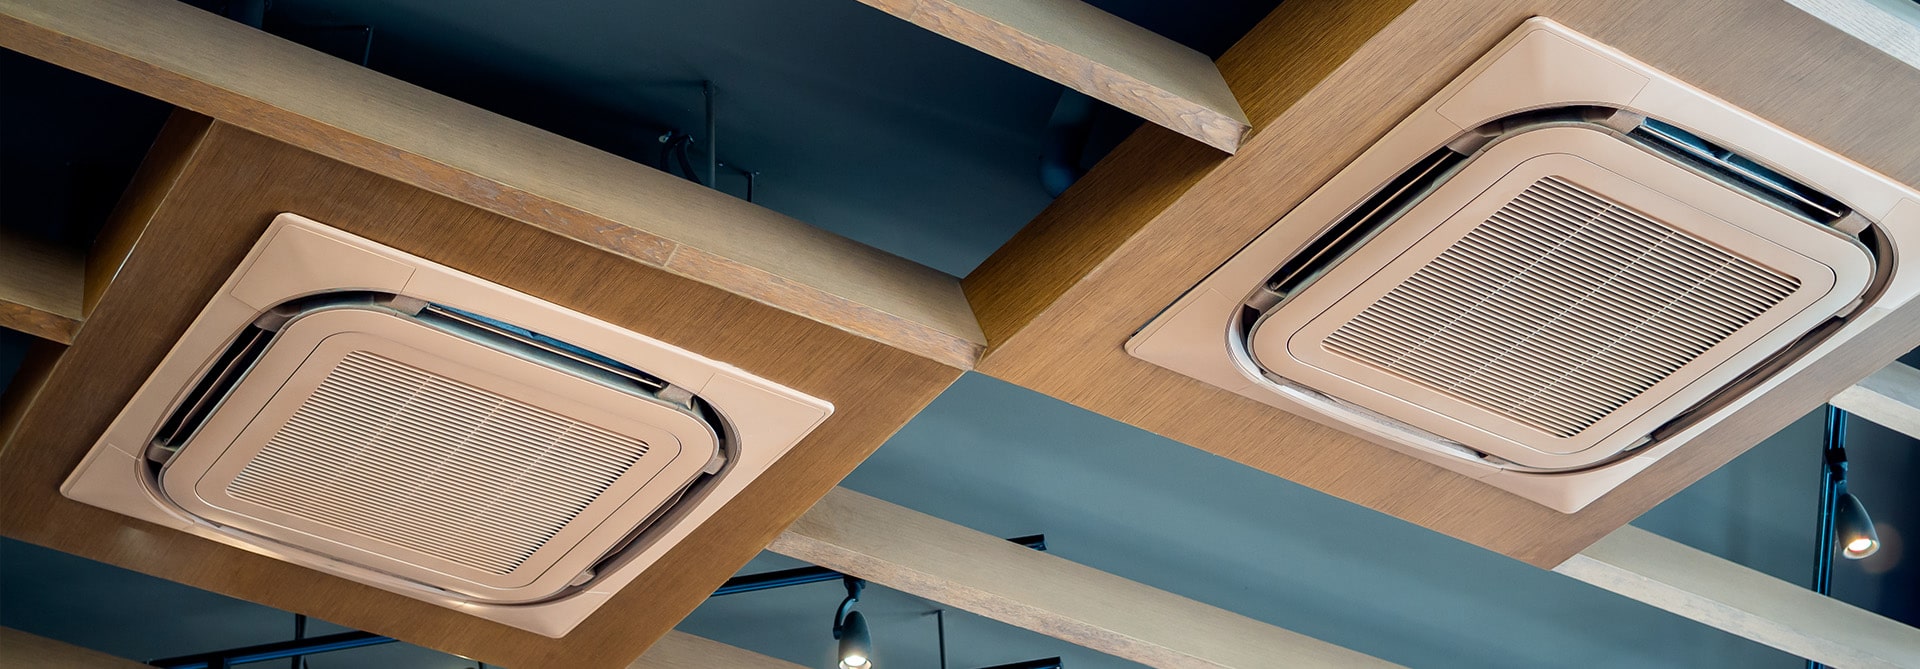 Ceiling Cassette Air Conditioner System